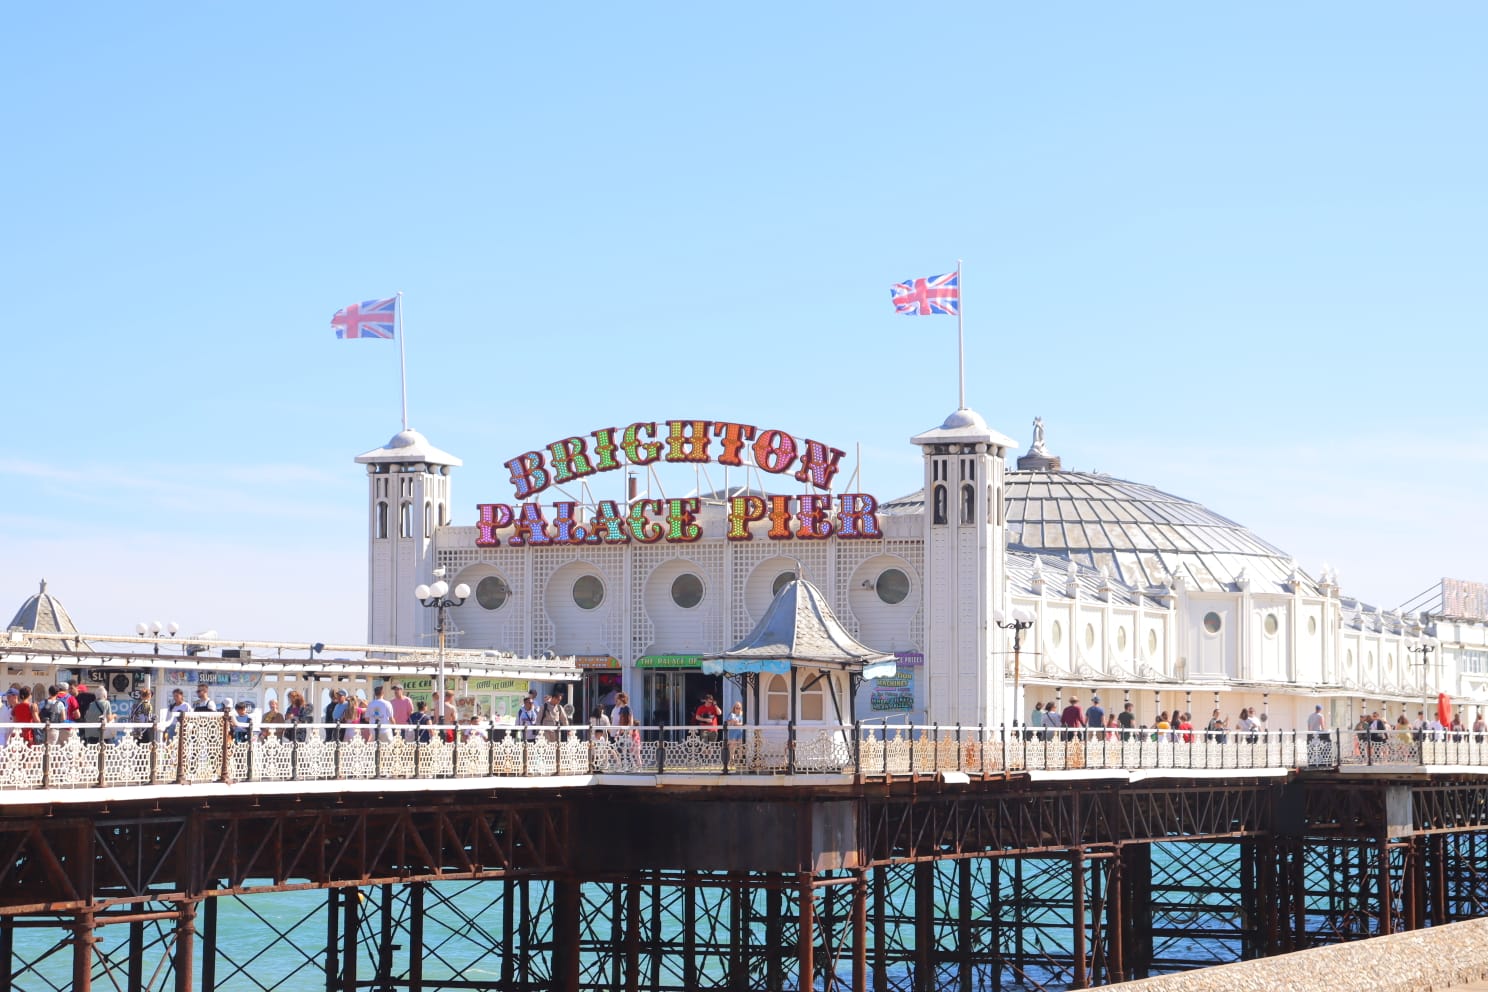 Big white building which says "Brighton Palace Pier"